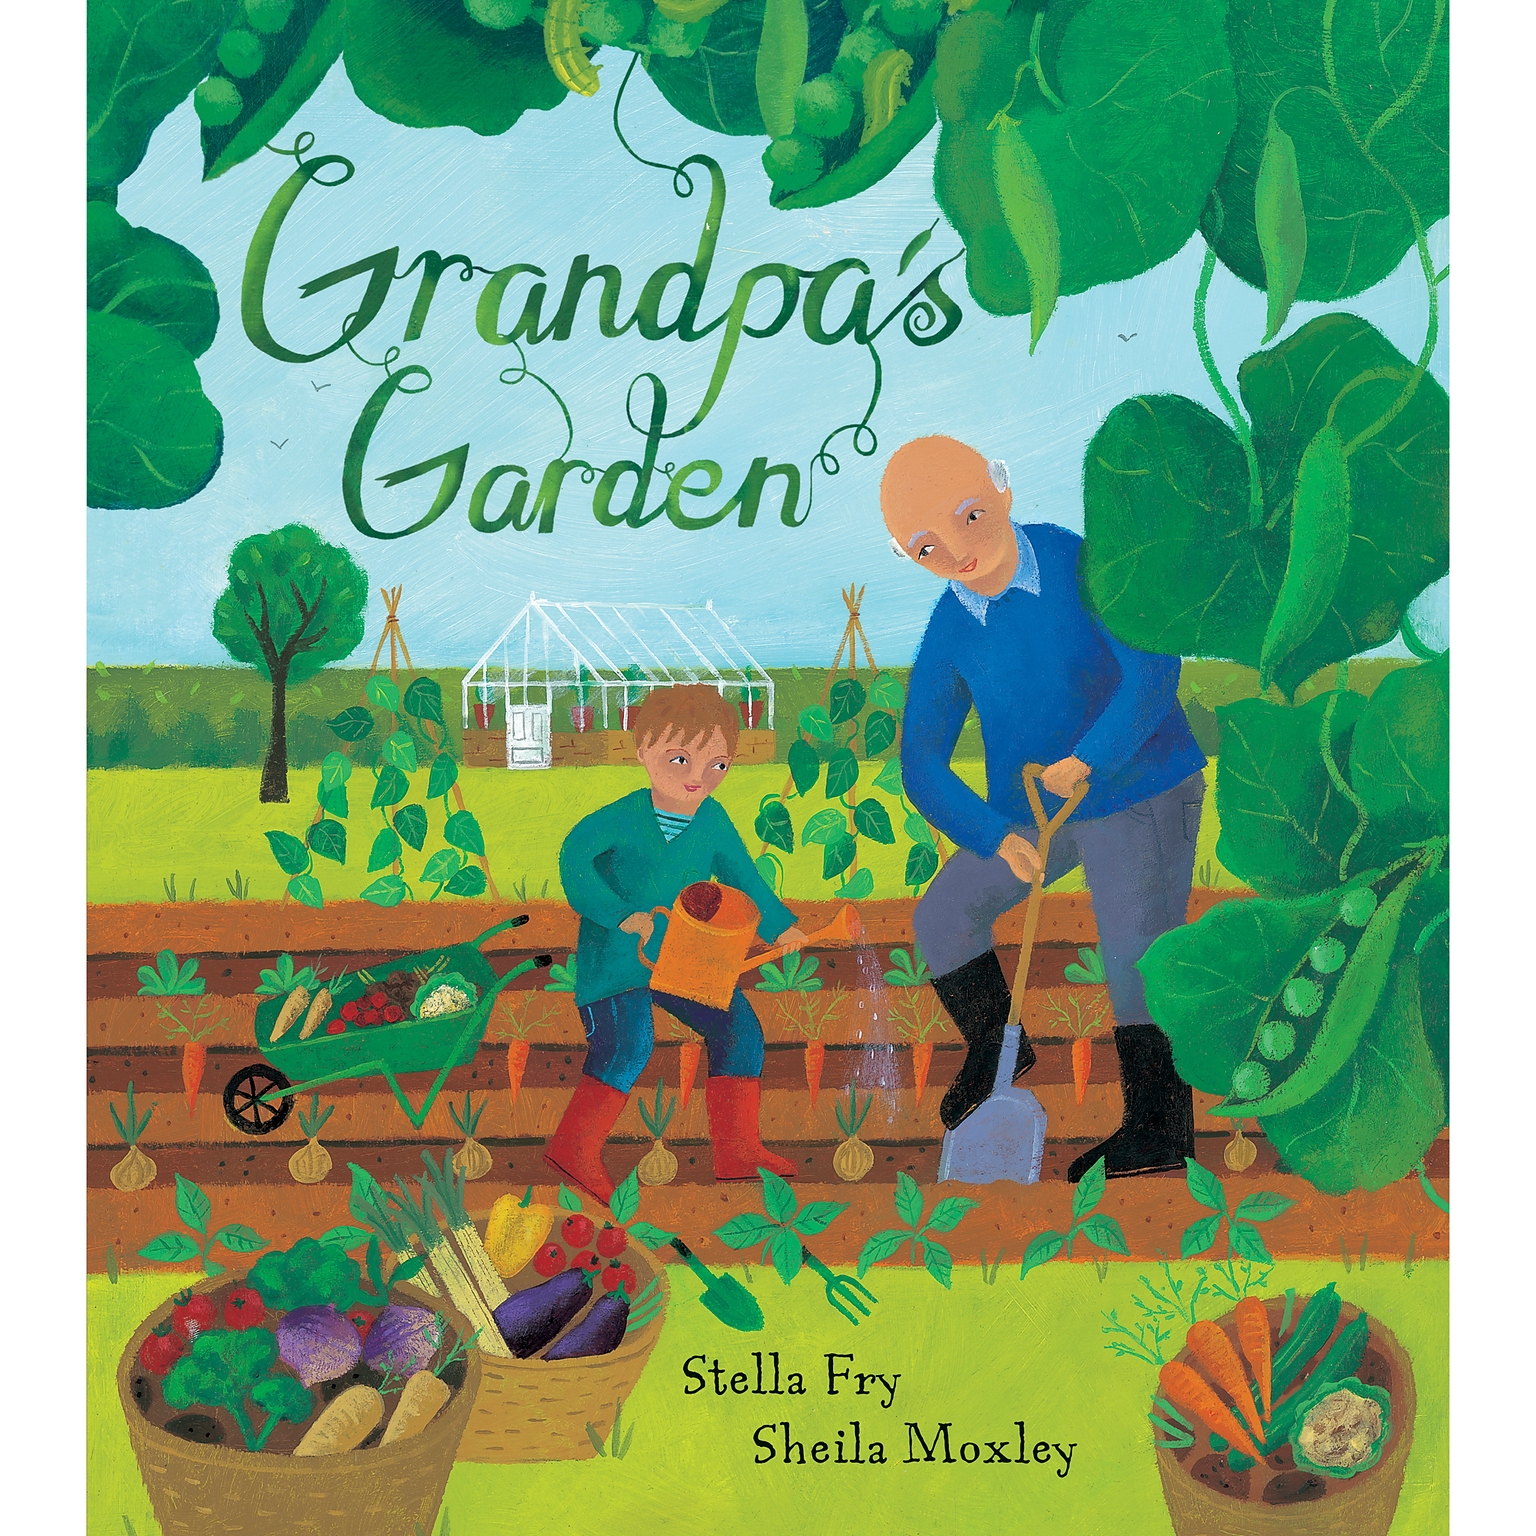 Grandpas Garden by Stella Fry and Sheila Moxley, Pack of 3 (BBK9781846868092BN)